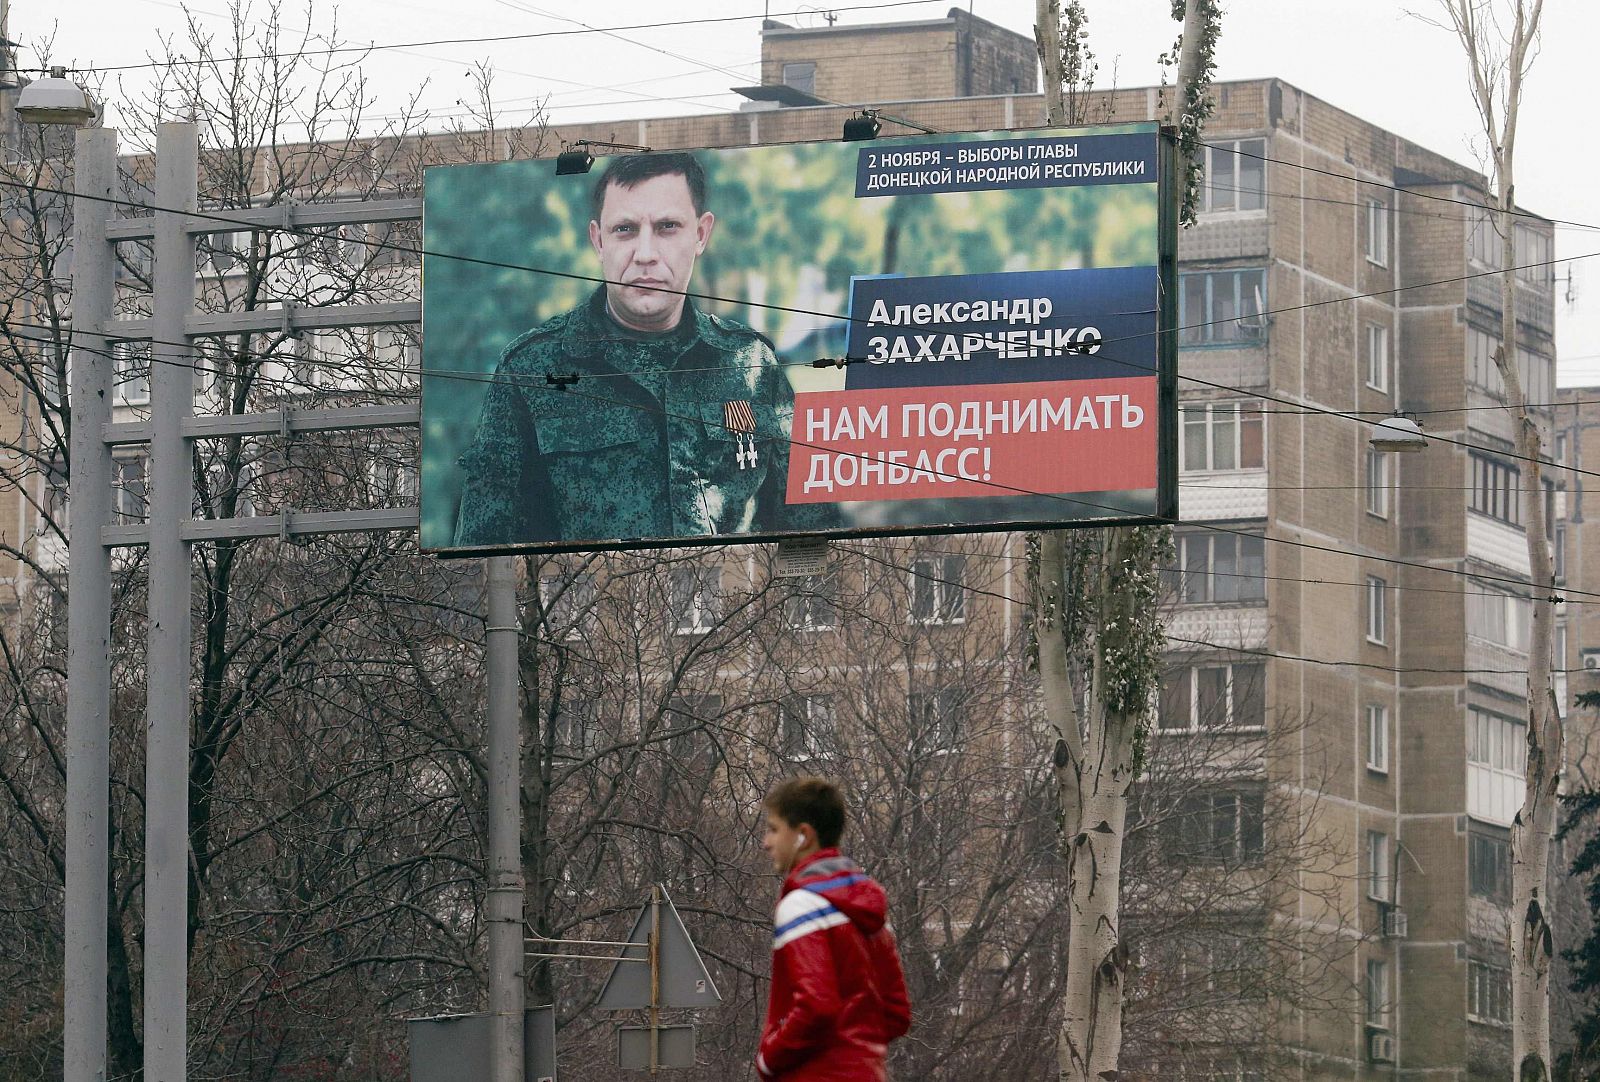 Man walks past an election information board with portrait of Zakharchenko, separatist leader of the self-proclaimed Donetsk People's Republic, in Donetsk